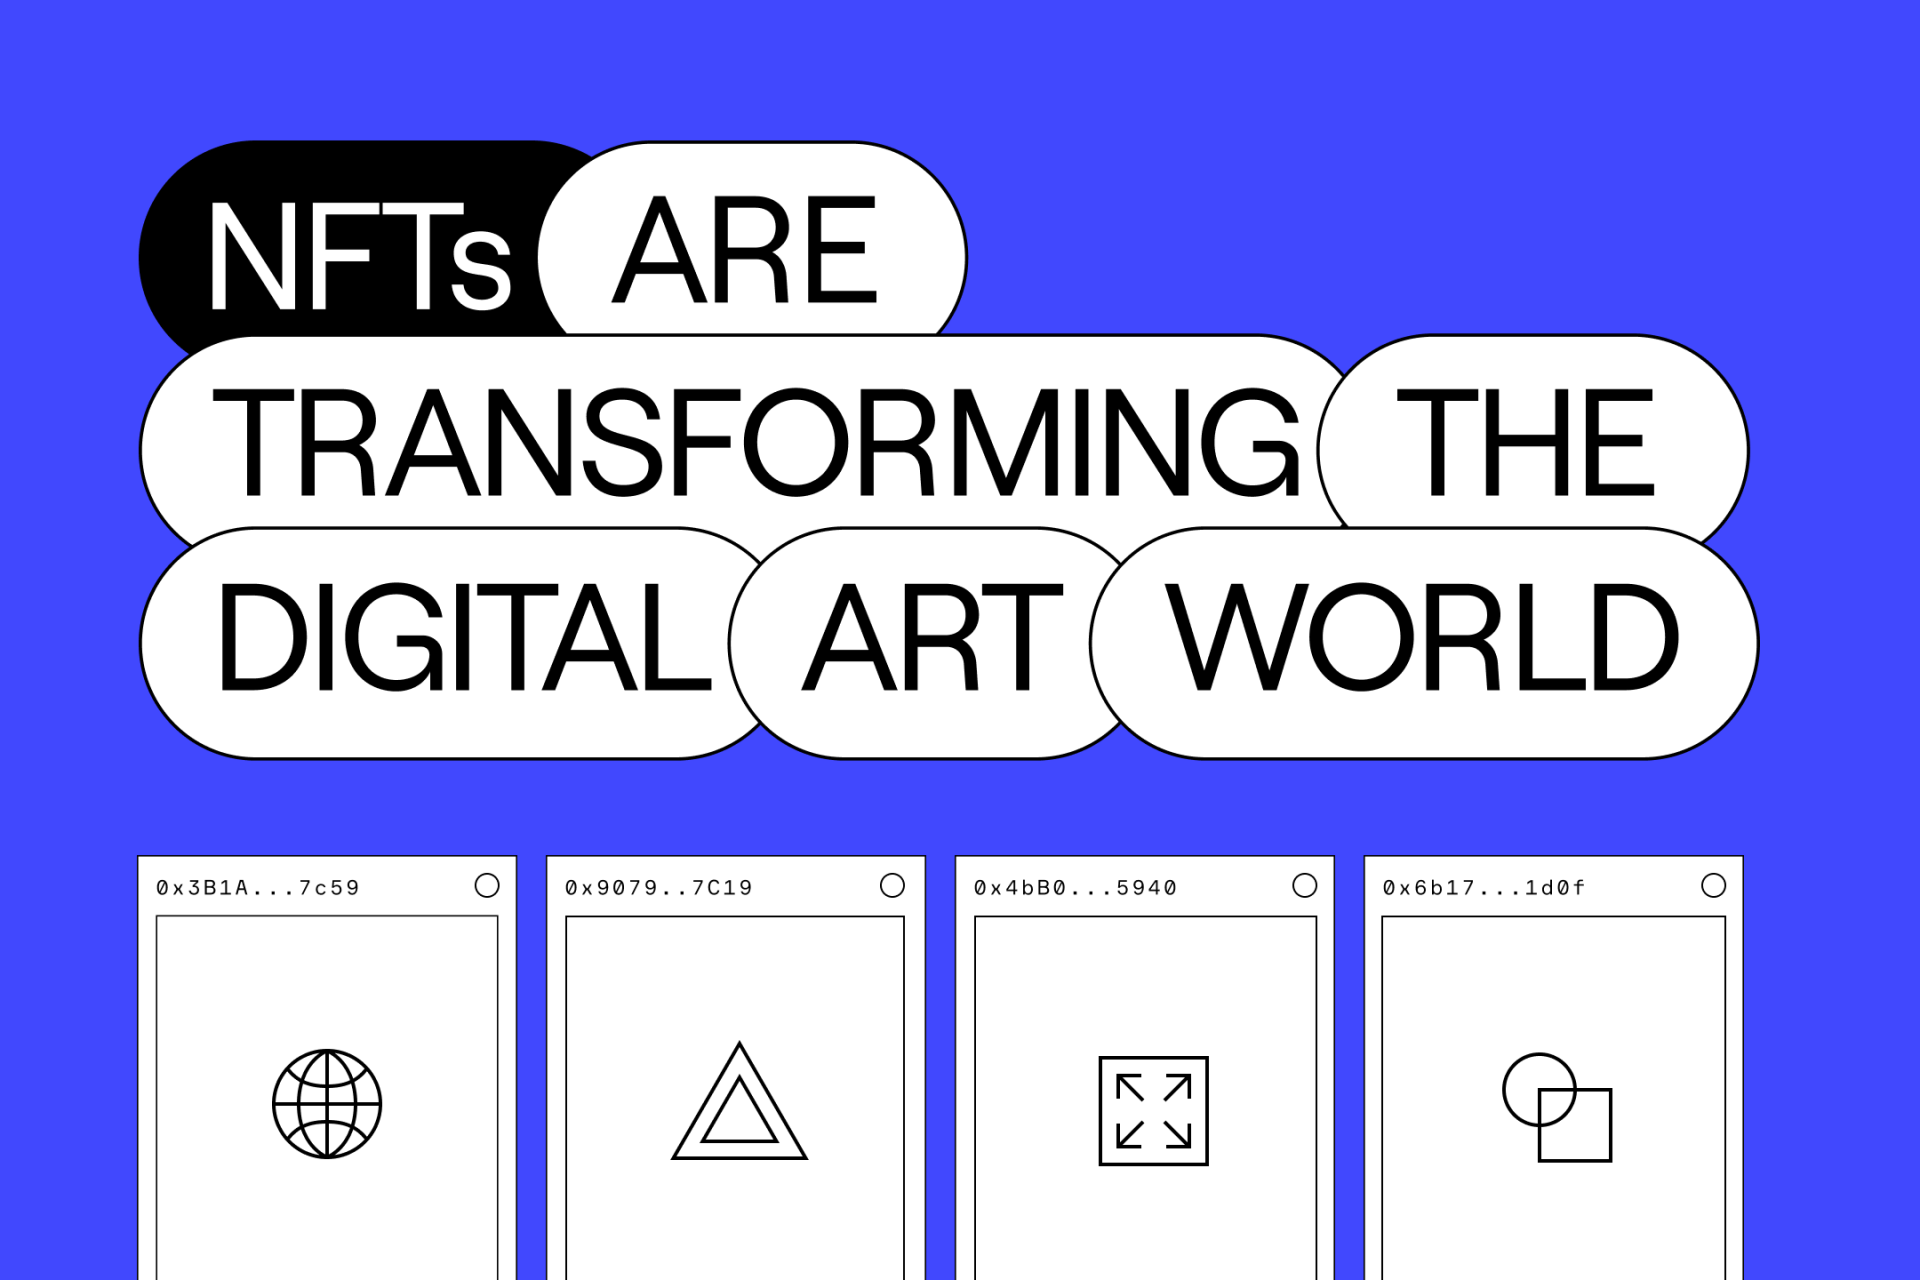 NFTs are transforming the digital art world.